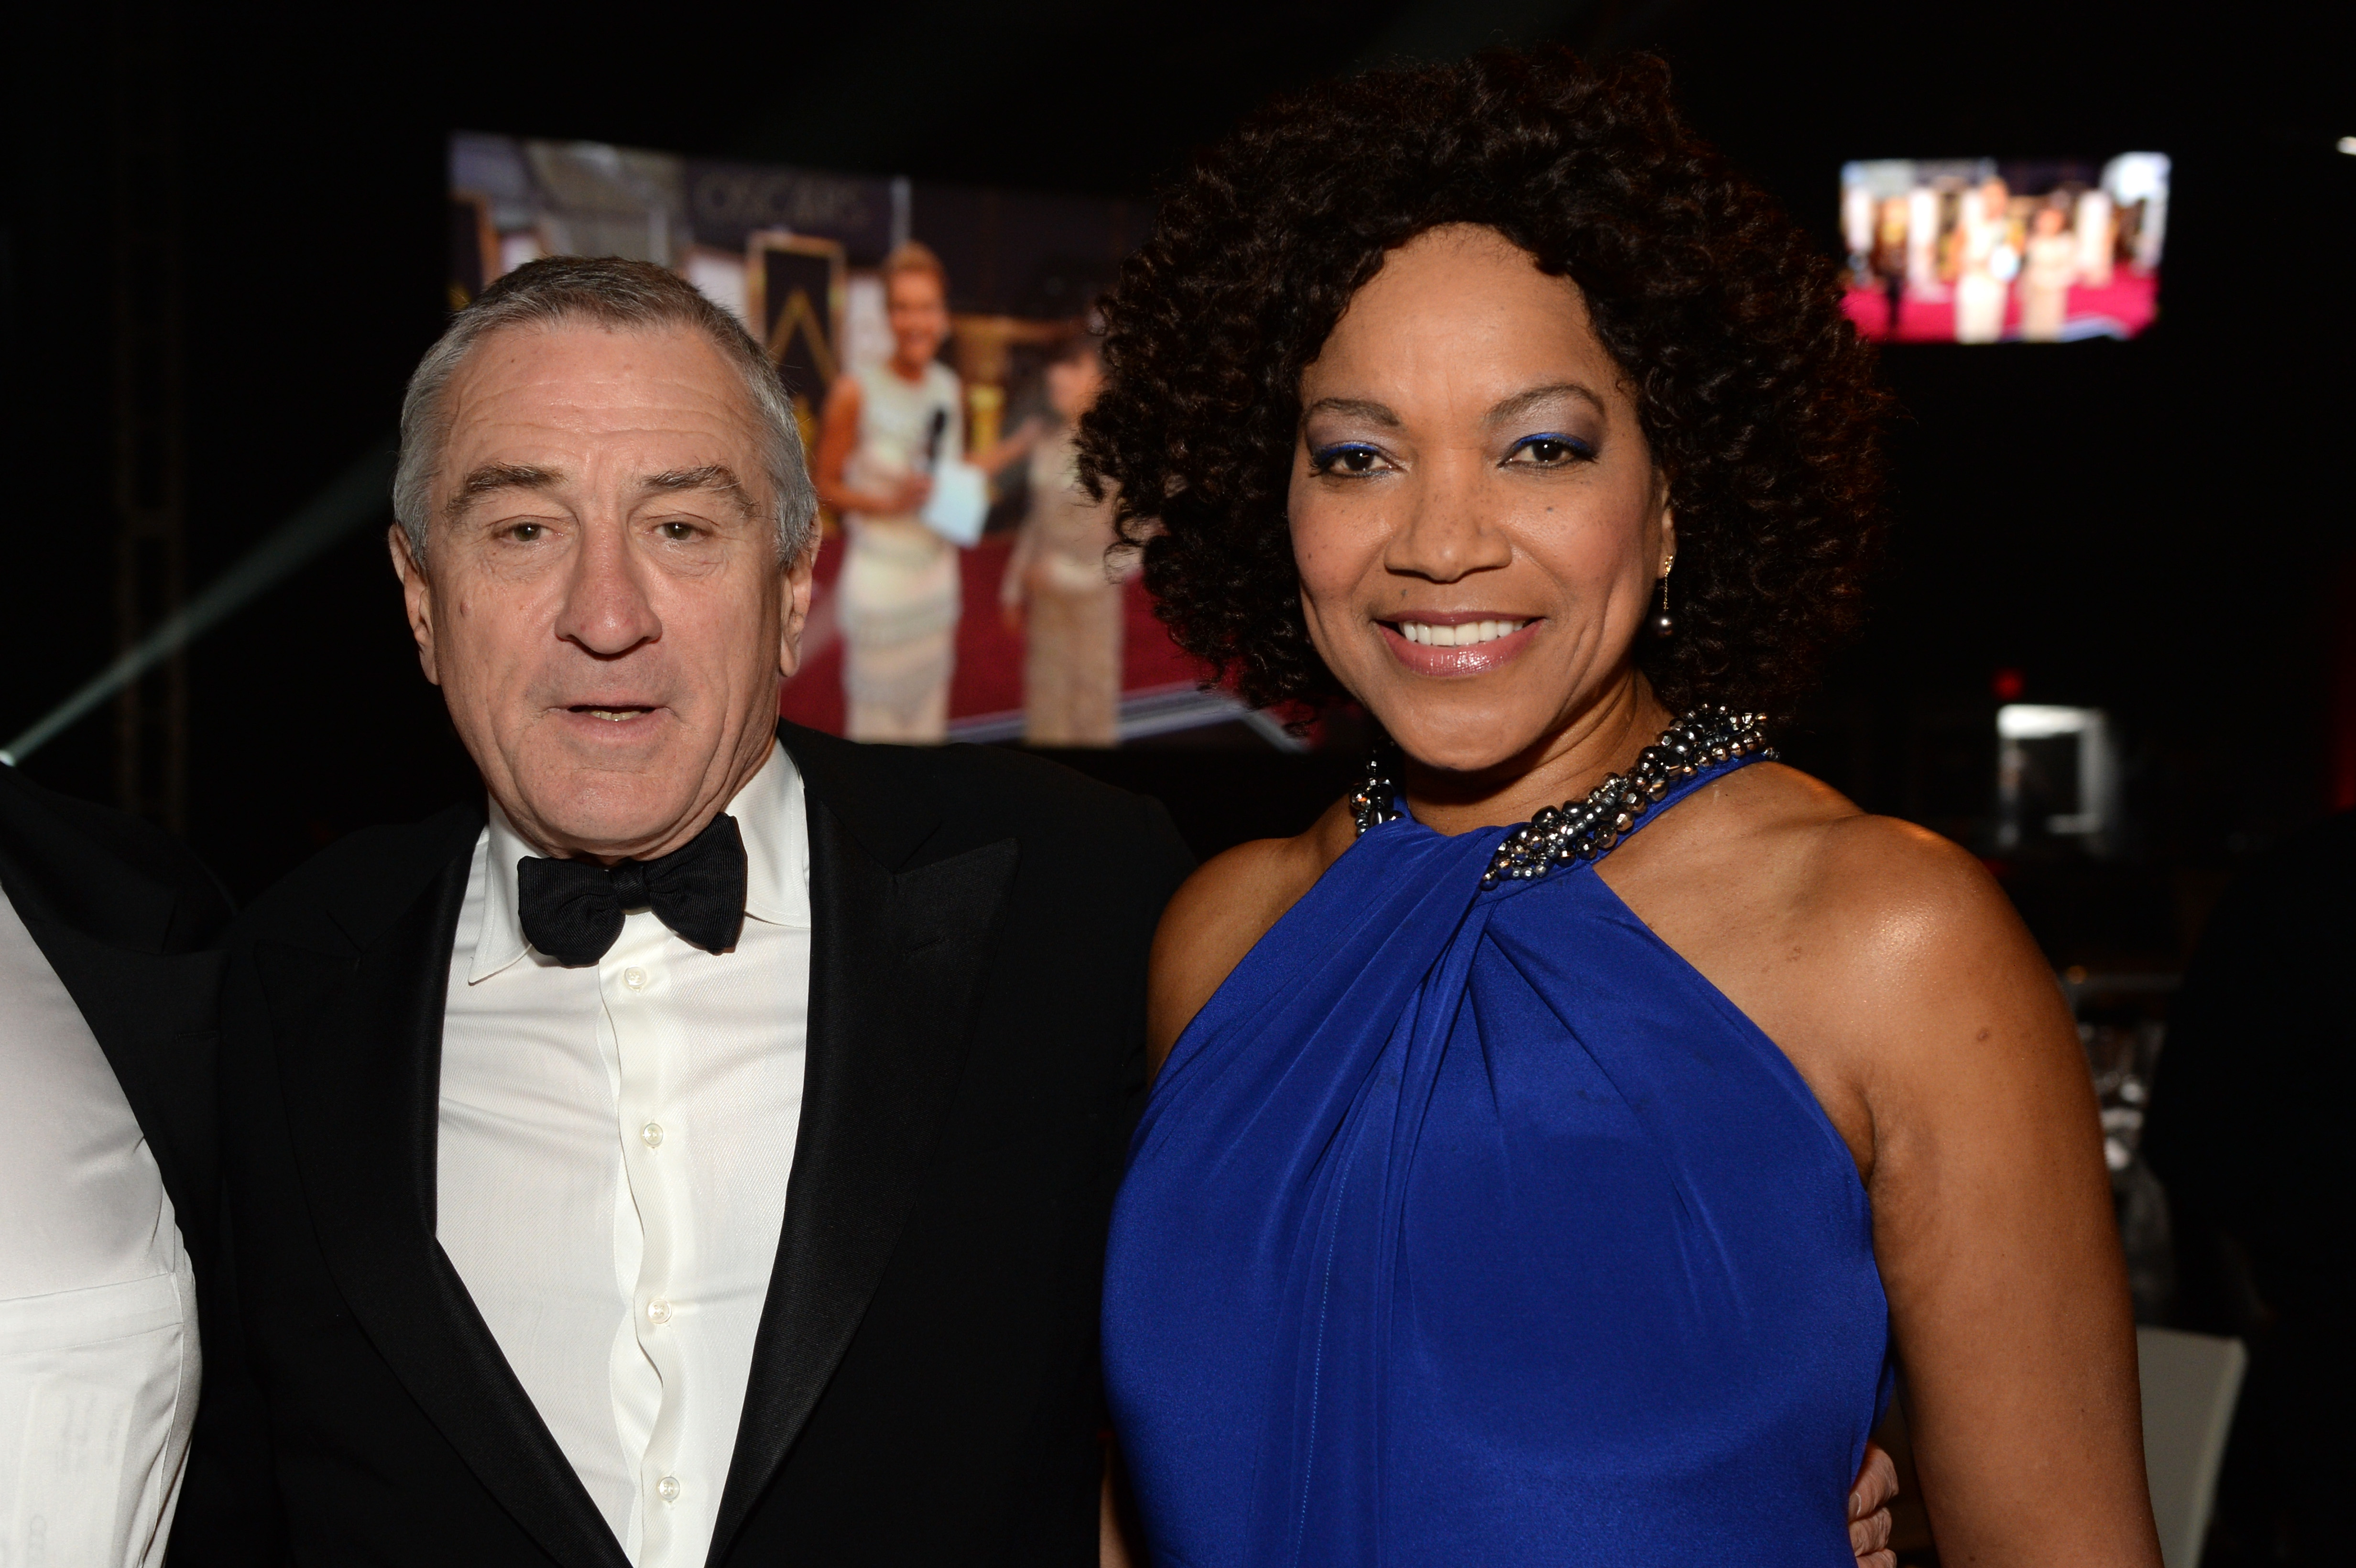 Robert De Niro and Grace Hightower at the 22nd Annual Elton John AIDS Foundation Academy Awards Viewing Party in 2014, in West Hollywood, California. | Source: Getty Images